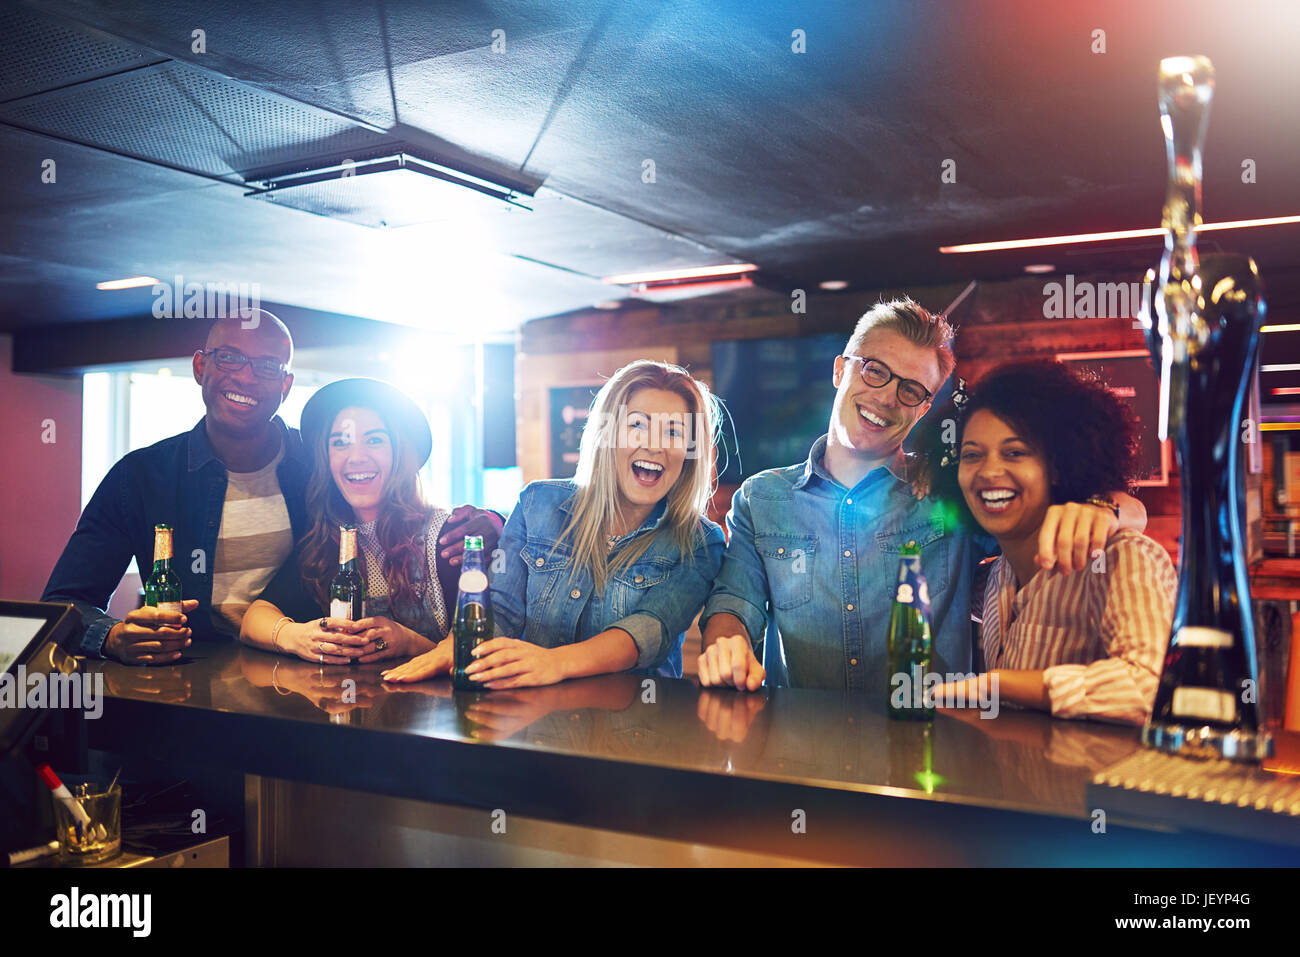 Joyful friends laughing and looking at camera while drinking inside the bar. Stock Photo